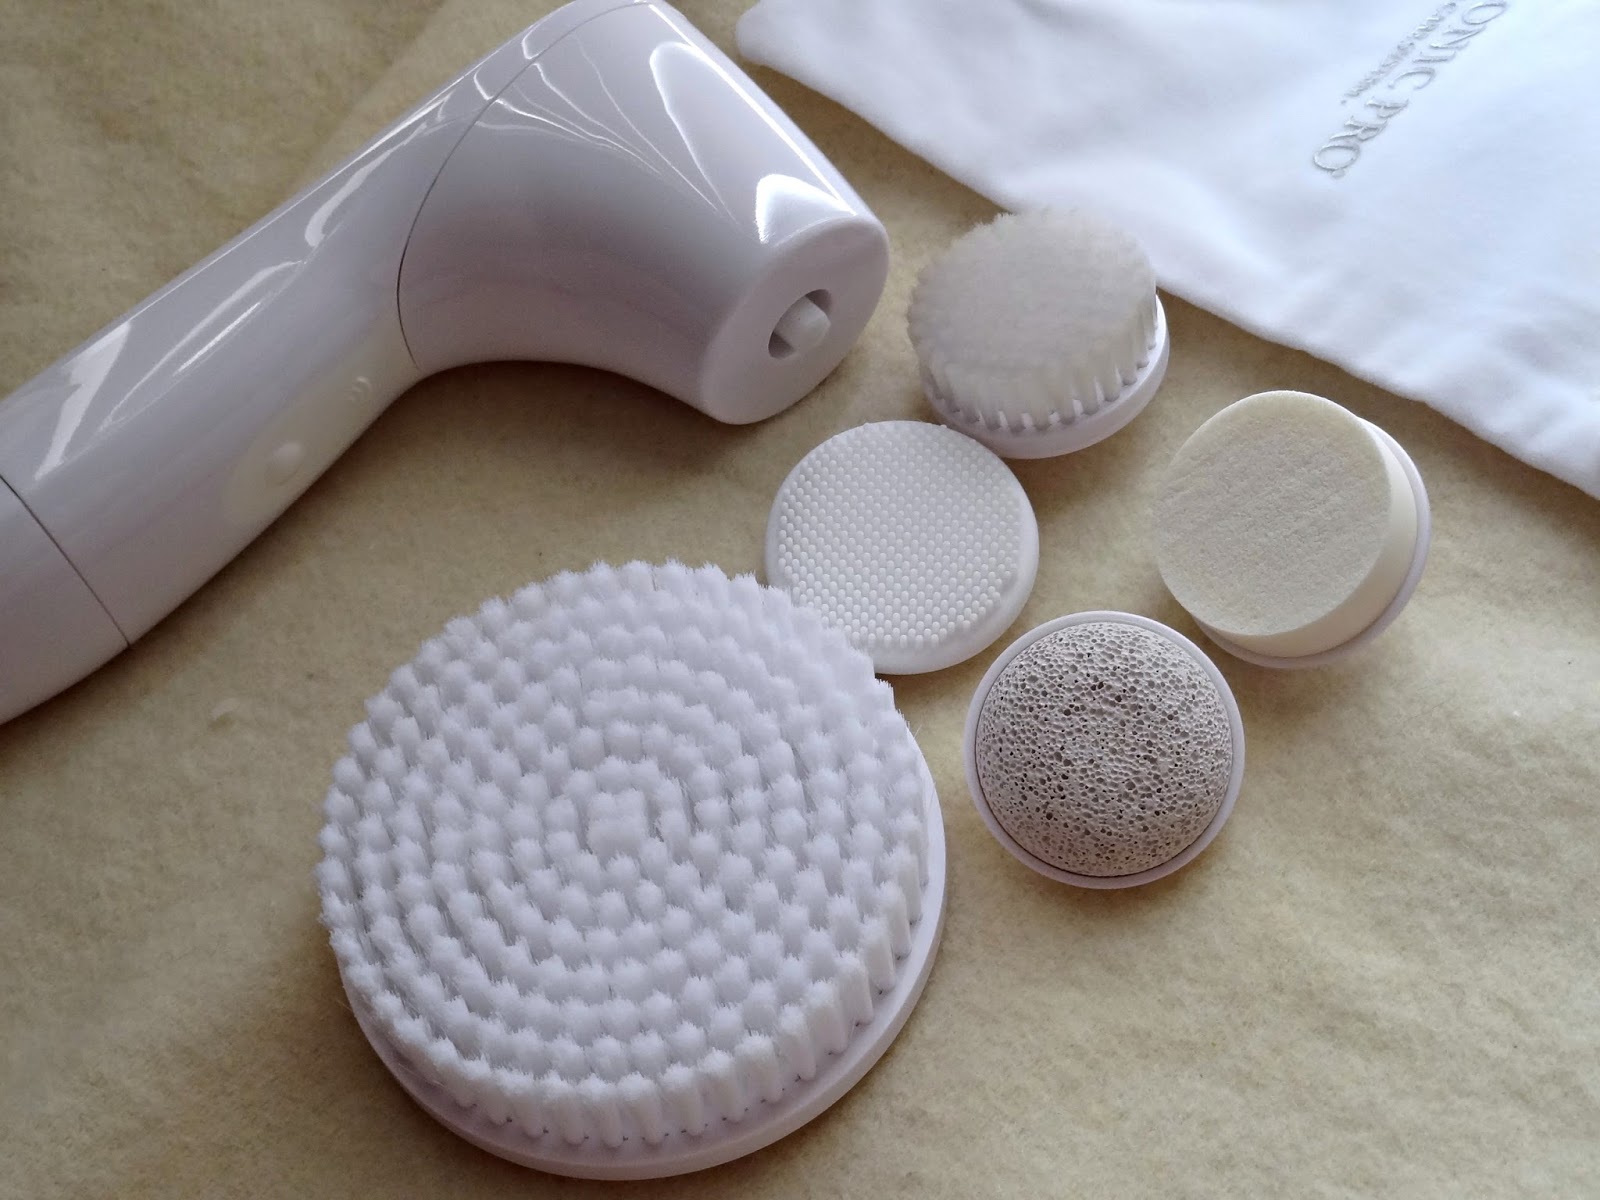 Spa Sonic Pro Skincare Cleansing System Review, Photos